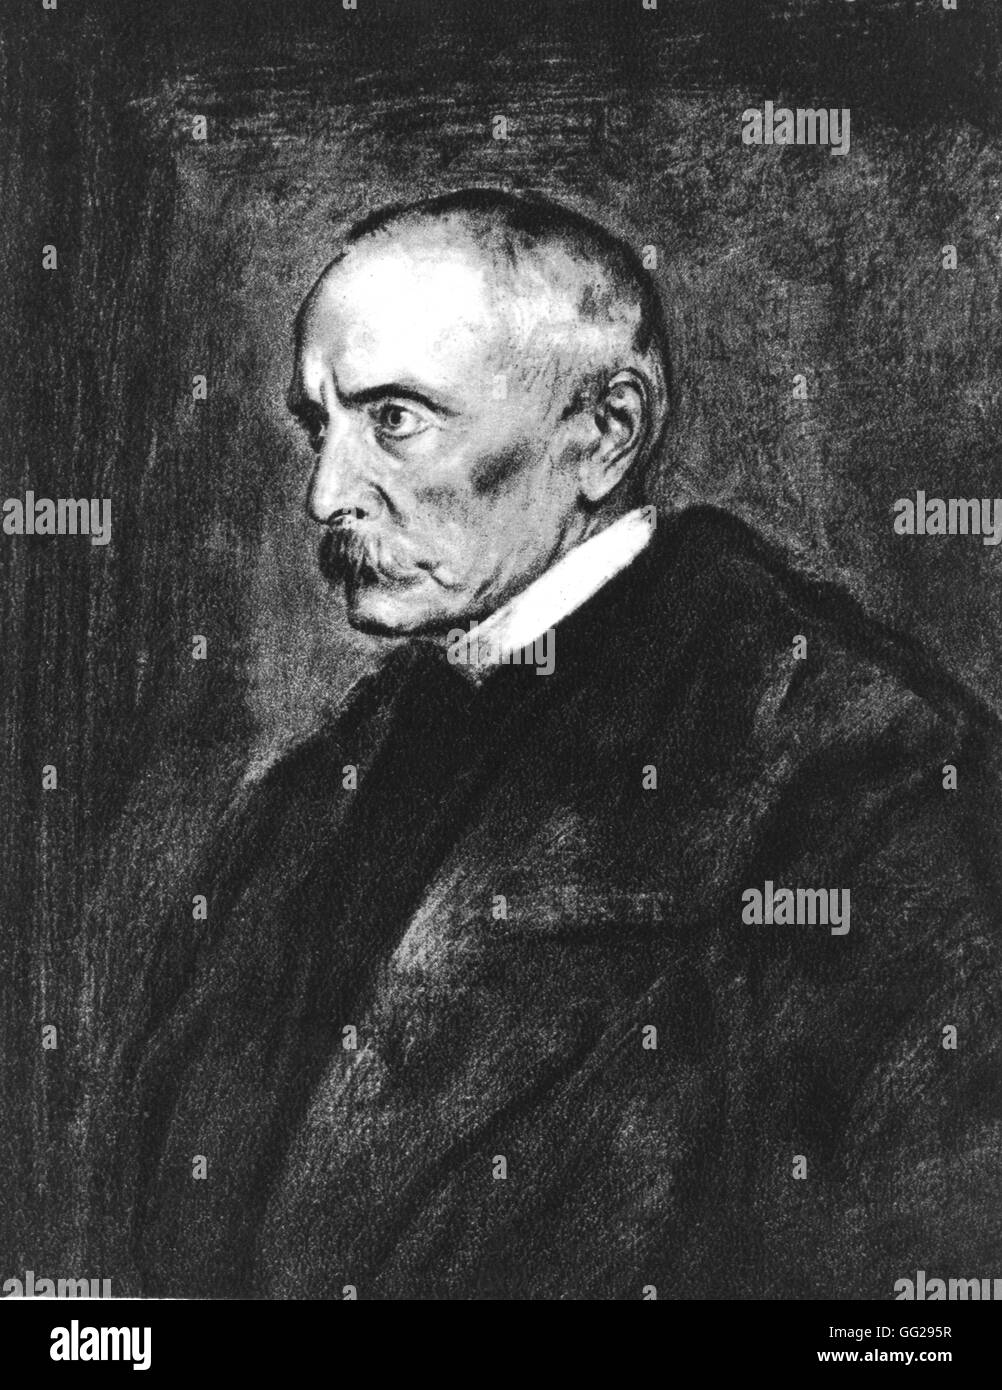 Count of Hohenlohe, minister of Bismarck, after a painting by Lenbachs (1819-1901) 19th century Germany Stock Photo